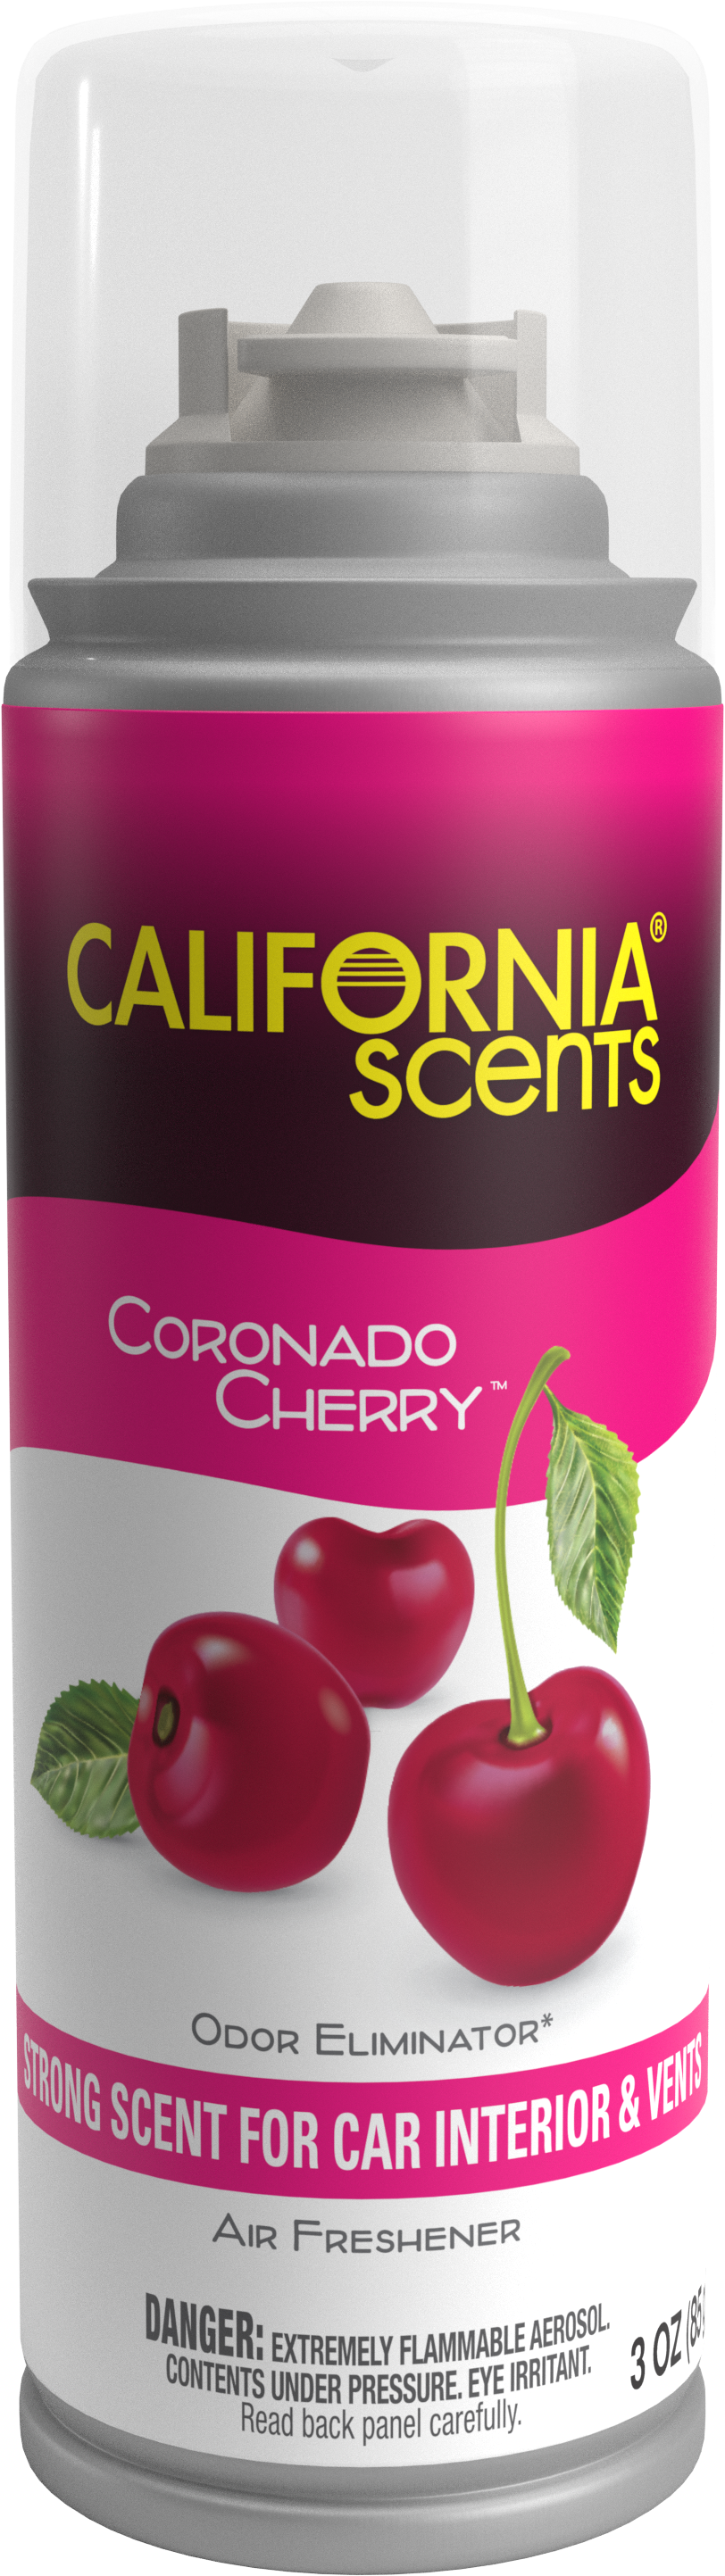 California Scents CSCF12TRY182 California Car Scents: Auto Air Fresheners +  (091400000486-2)